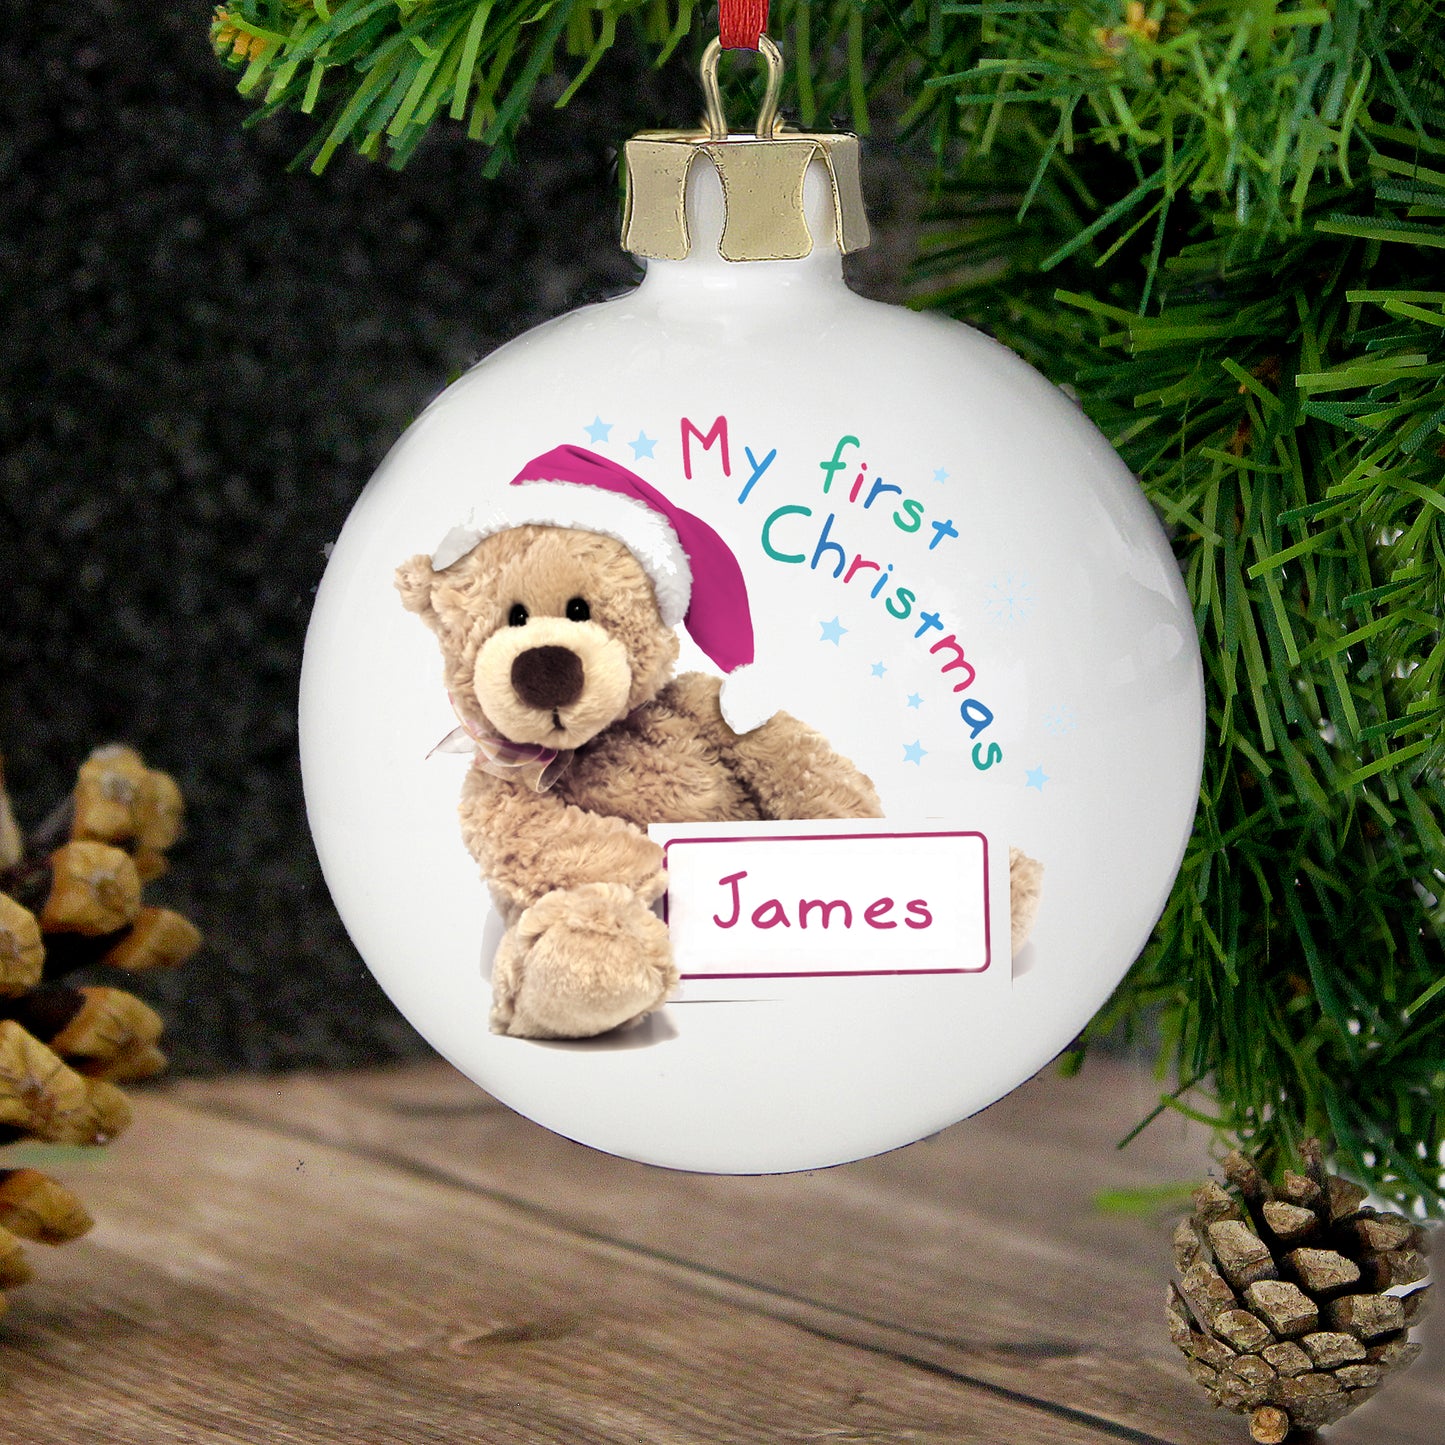 Personalised Teddy First Christmas Bauble